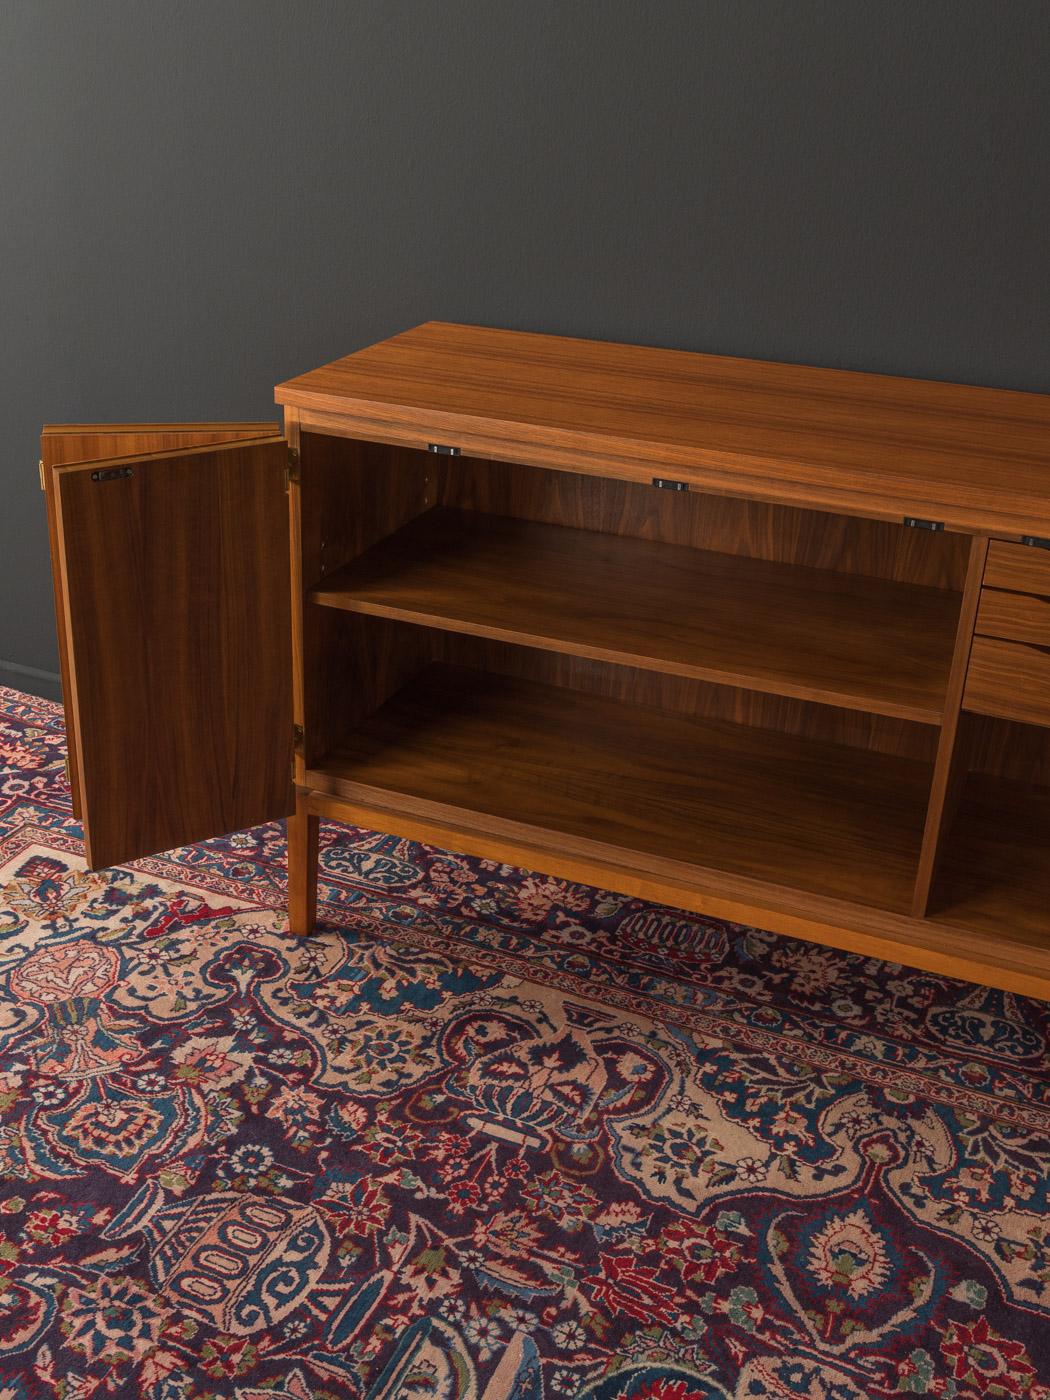 Walnut Wk Möbel Sideboard from the 1950s Designed by Paul McCobb, Made in Germany